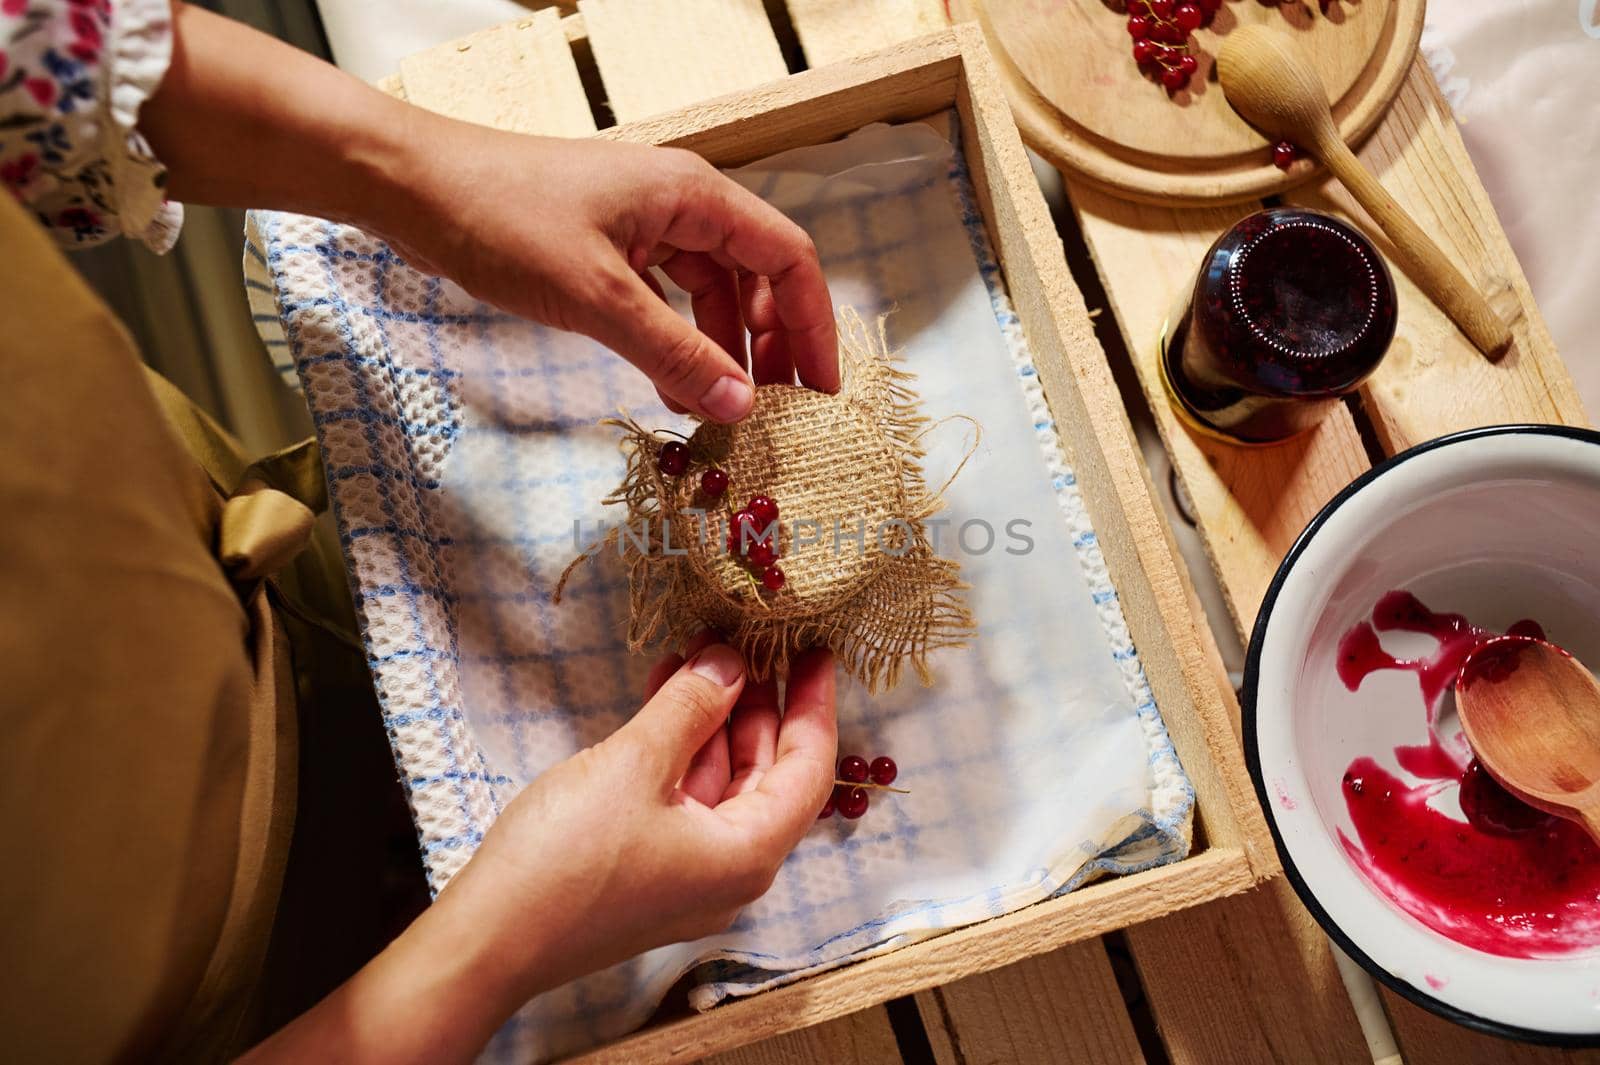 Preparing preserves, marmalades, confitures and jelly at home kitchen. Close-up hands of a housewife tying bow on the burlap on a cover, decorating a jar of homemade red currant berry jam.